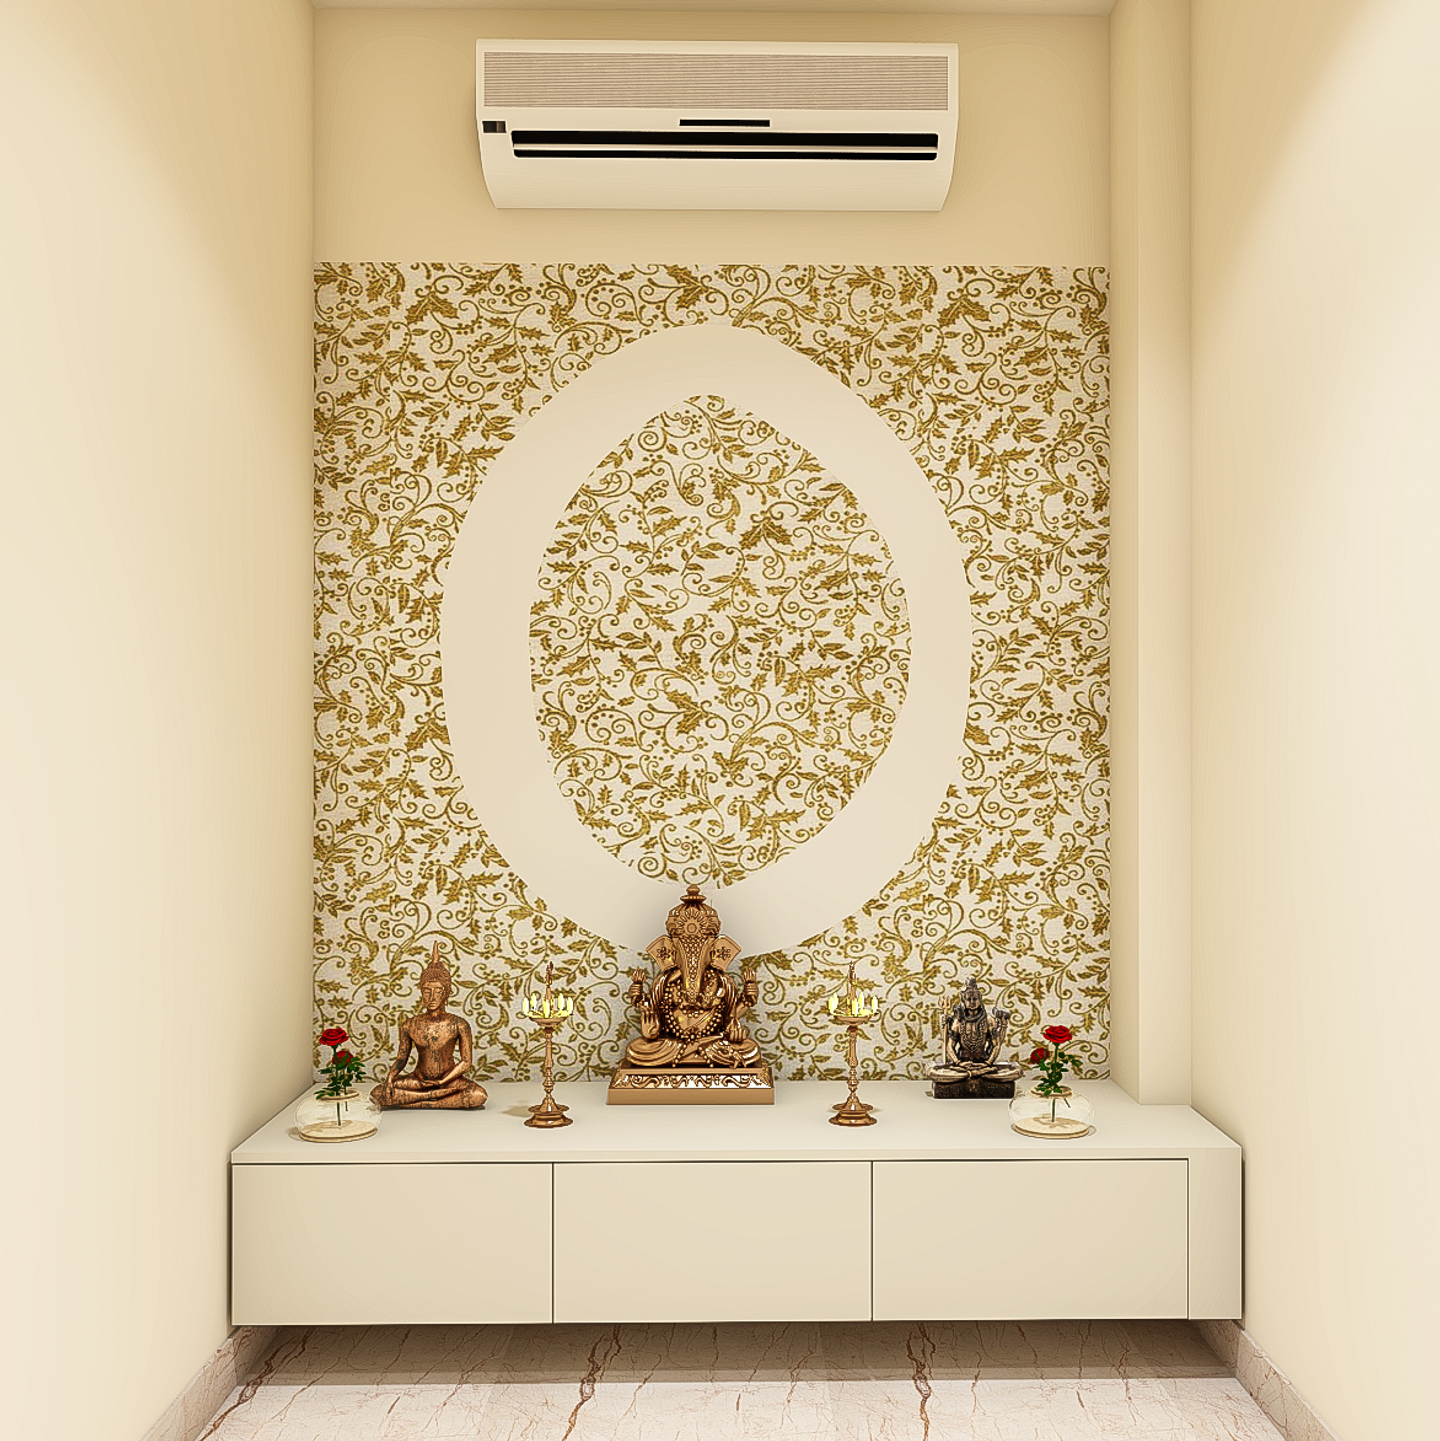 Patterned Wall Pooja Room Design with Storage Pooja Unit - Livspace